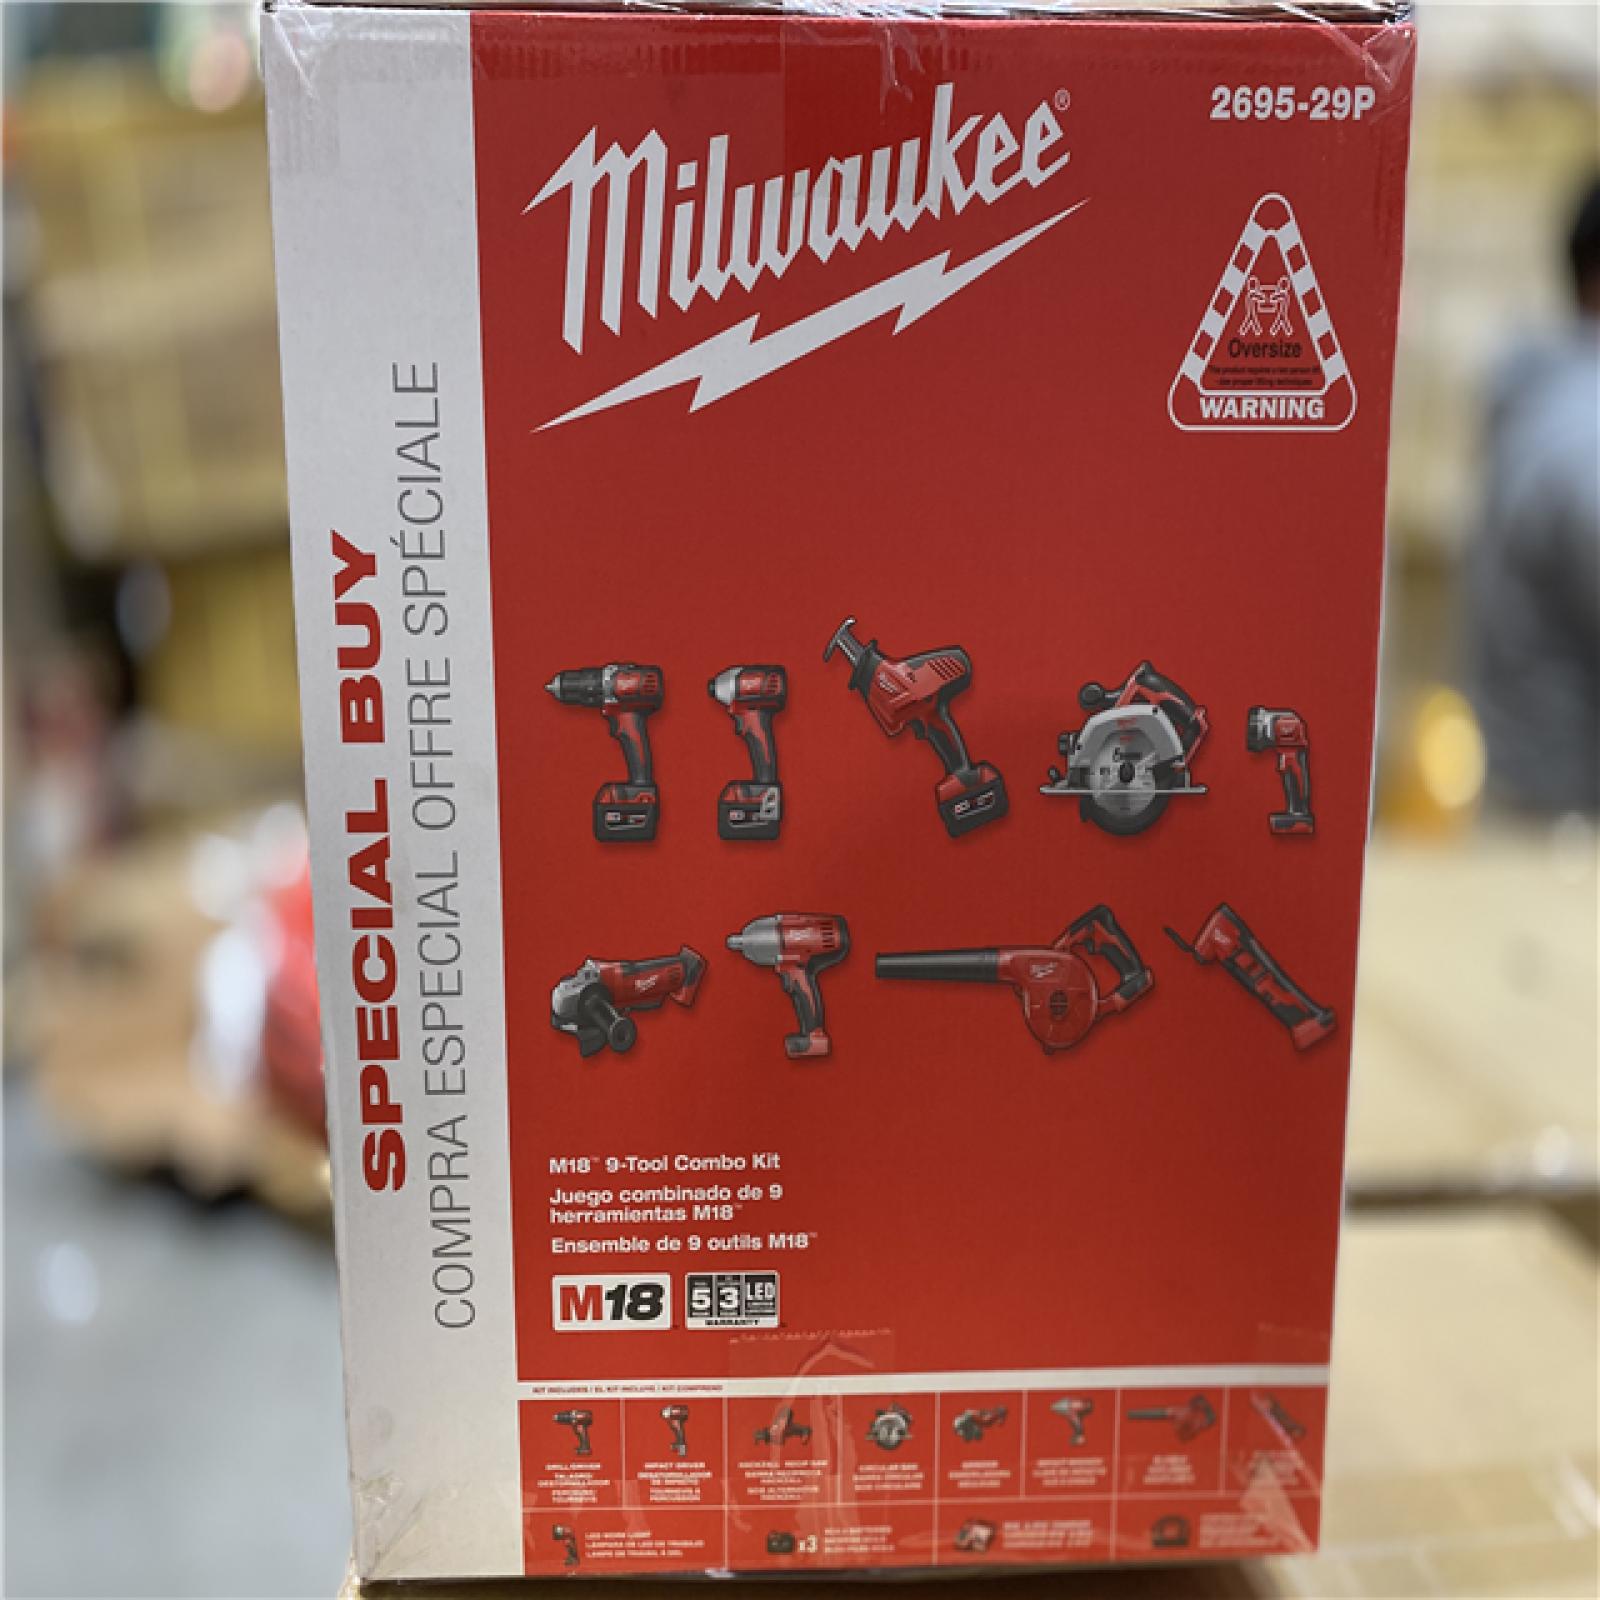 NEW!- Milwaukee M18 Cordless 9-Tool Combo Kit w/ (3) 4.0Ah Batteries & Charger